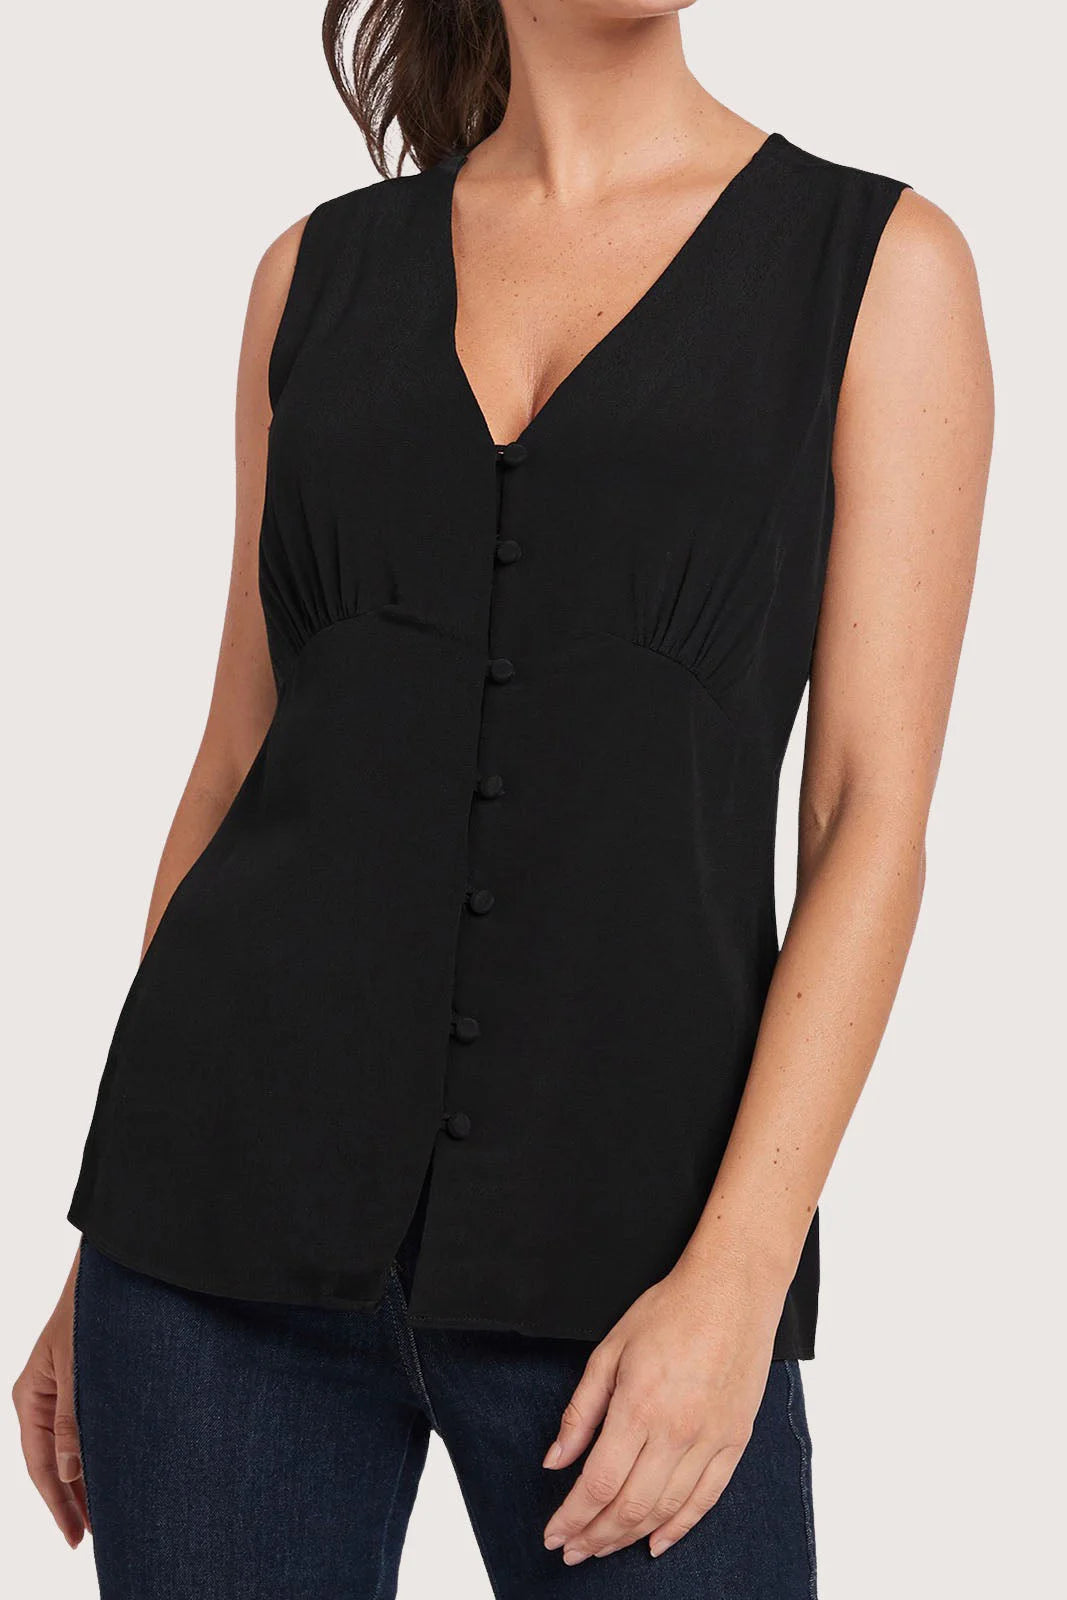 Secret Label Sleeveless Button Front Fitted Blouse Black /